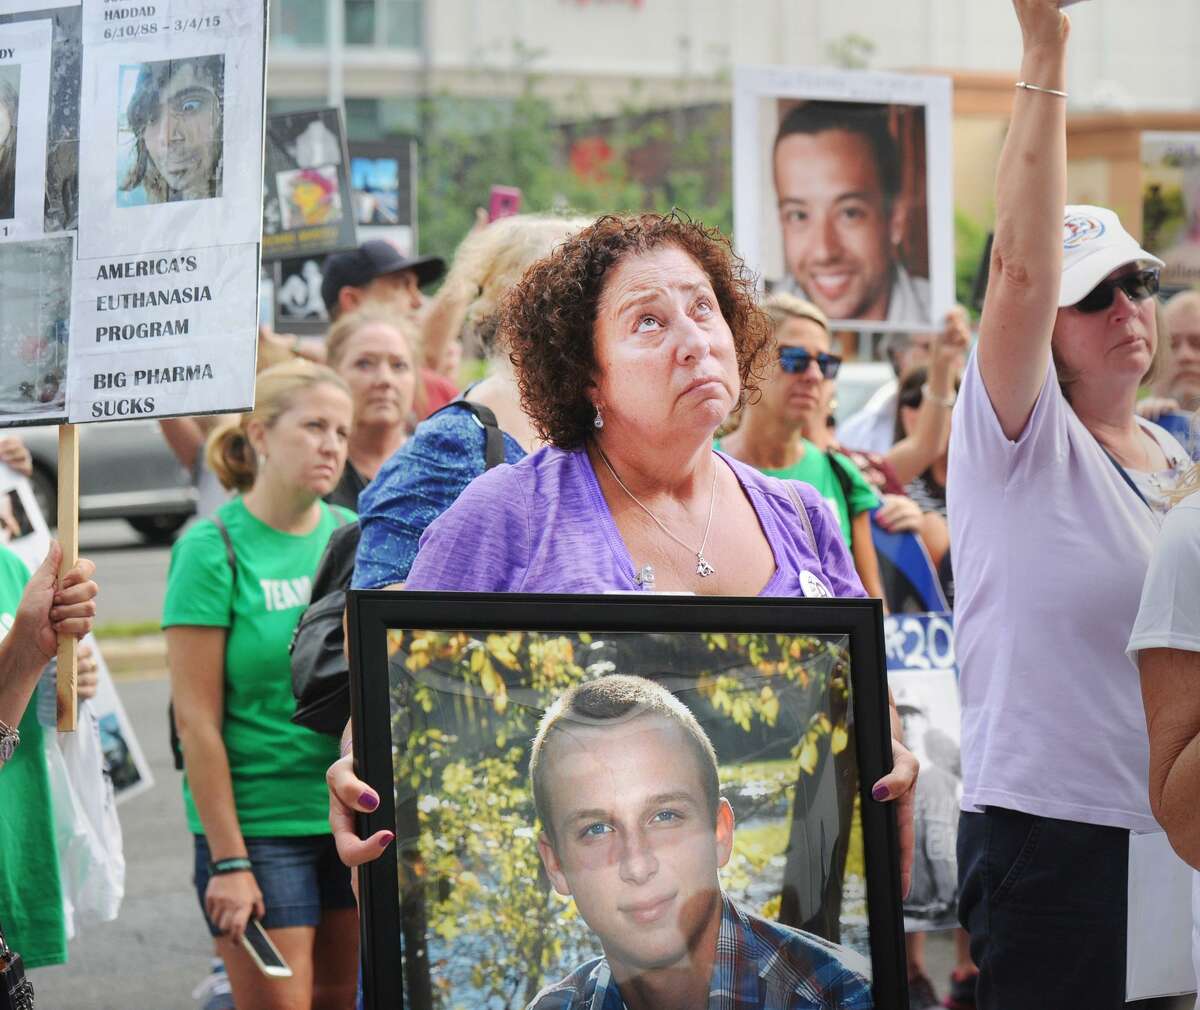 Nancy Tobin, of Hudson, Mass., looks skyward as she holds a poster photo of her late son, Scott Tobin, who died in 2017 and who she said was a victim of the opioid crisis, during a protest against Purdue Pharma, the maker of the opioid OxyContin, outside Purdue Pharma's headquarters at 201 Tresser Blvd., in Stamford, Conn., on Friday, August 17, 2018. Protesters said OxyContin is highly addictive and can be directly blamed for the opioid-related deaths of their loved ones.